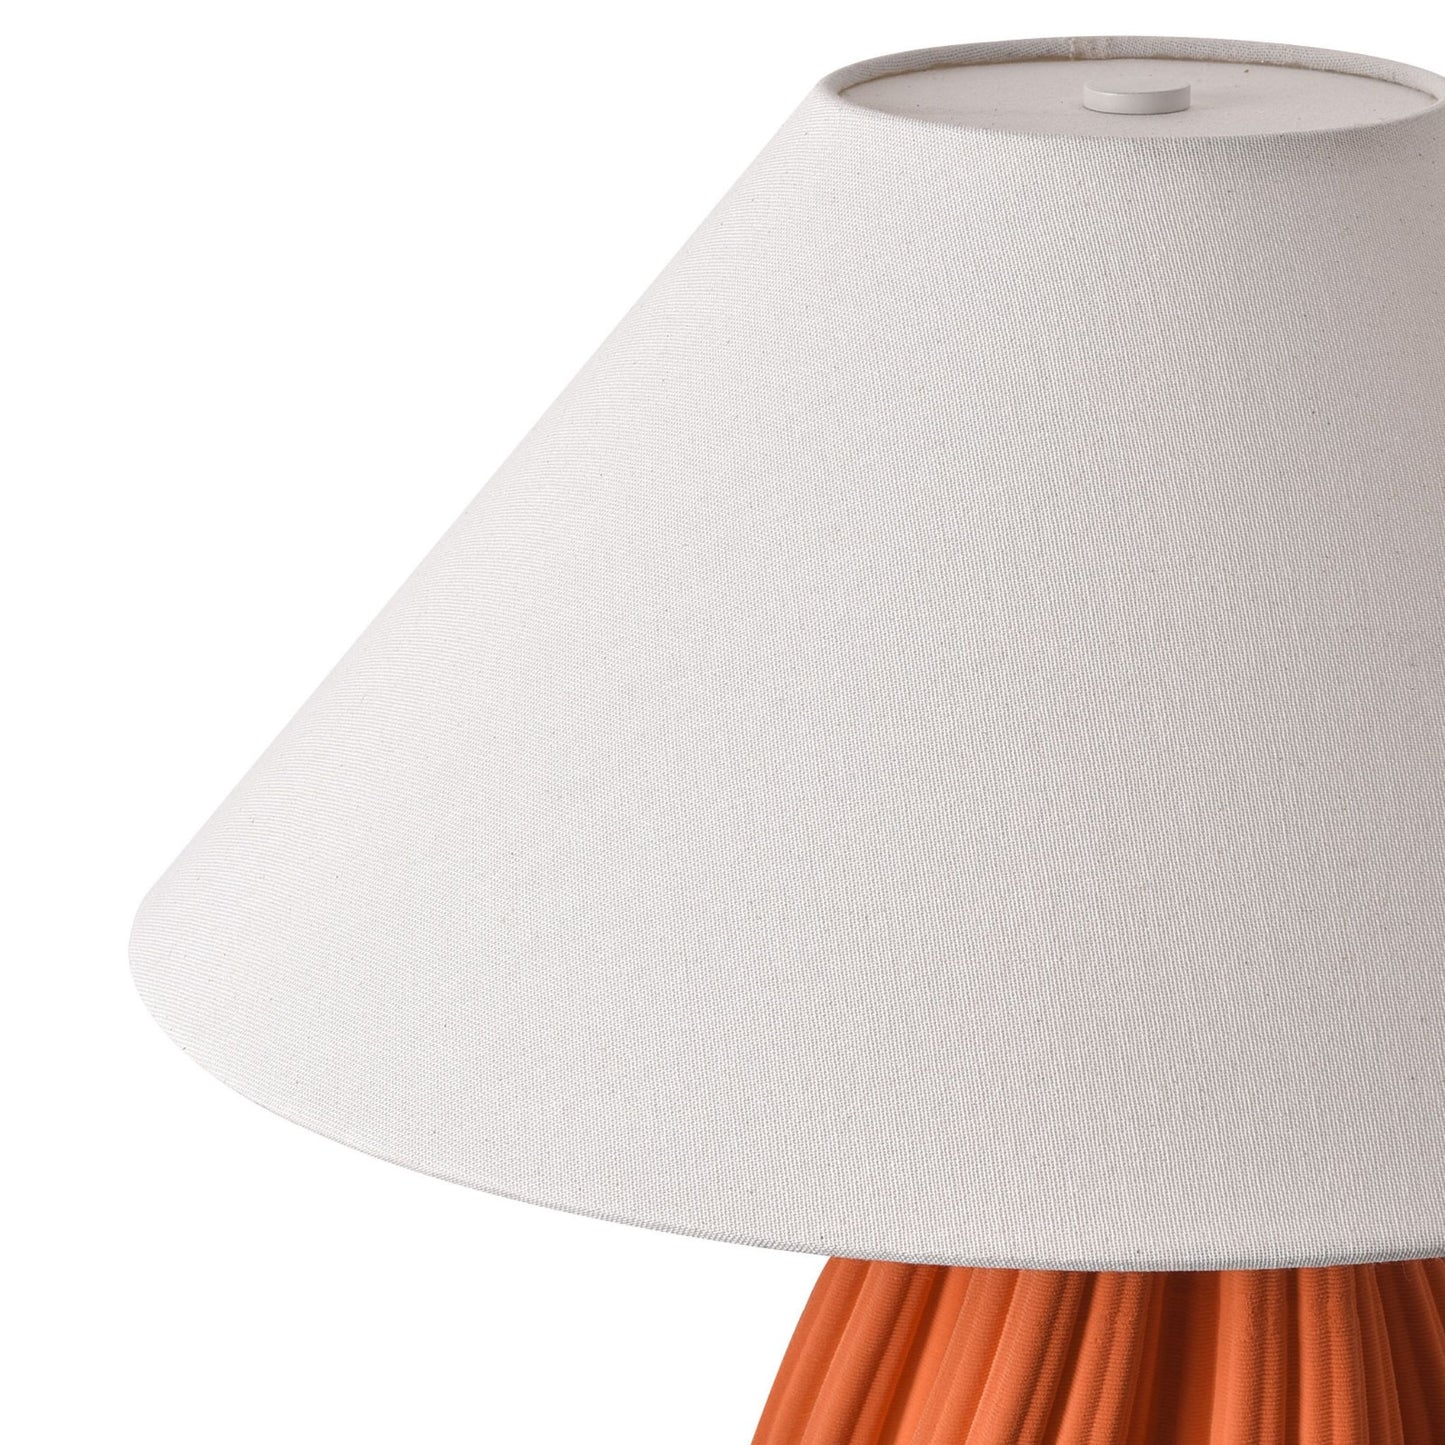 24" Orange Ceramic Bedside Table Lamp With White Empire Shade